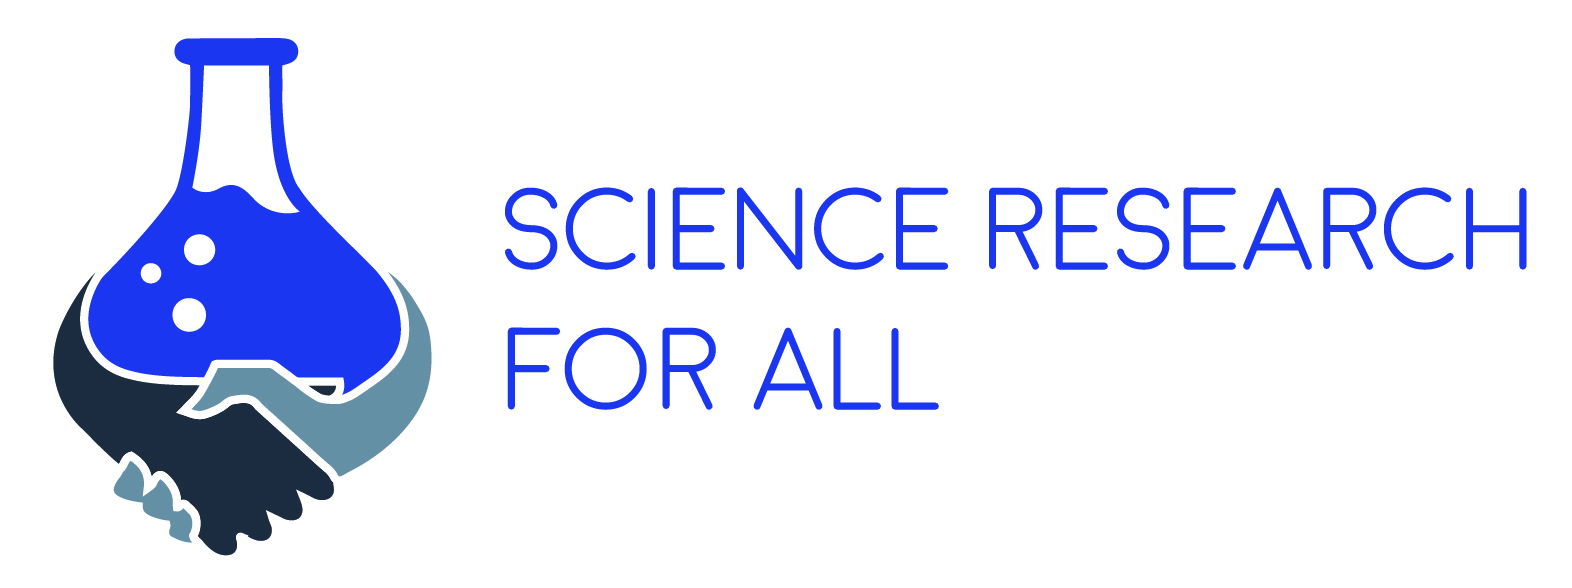 Science Research for All Logo Design